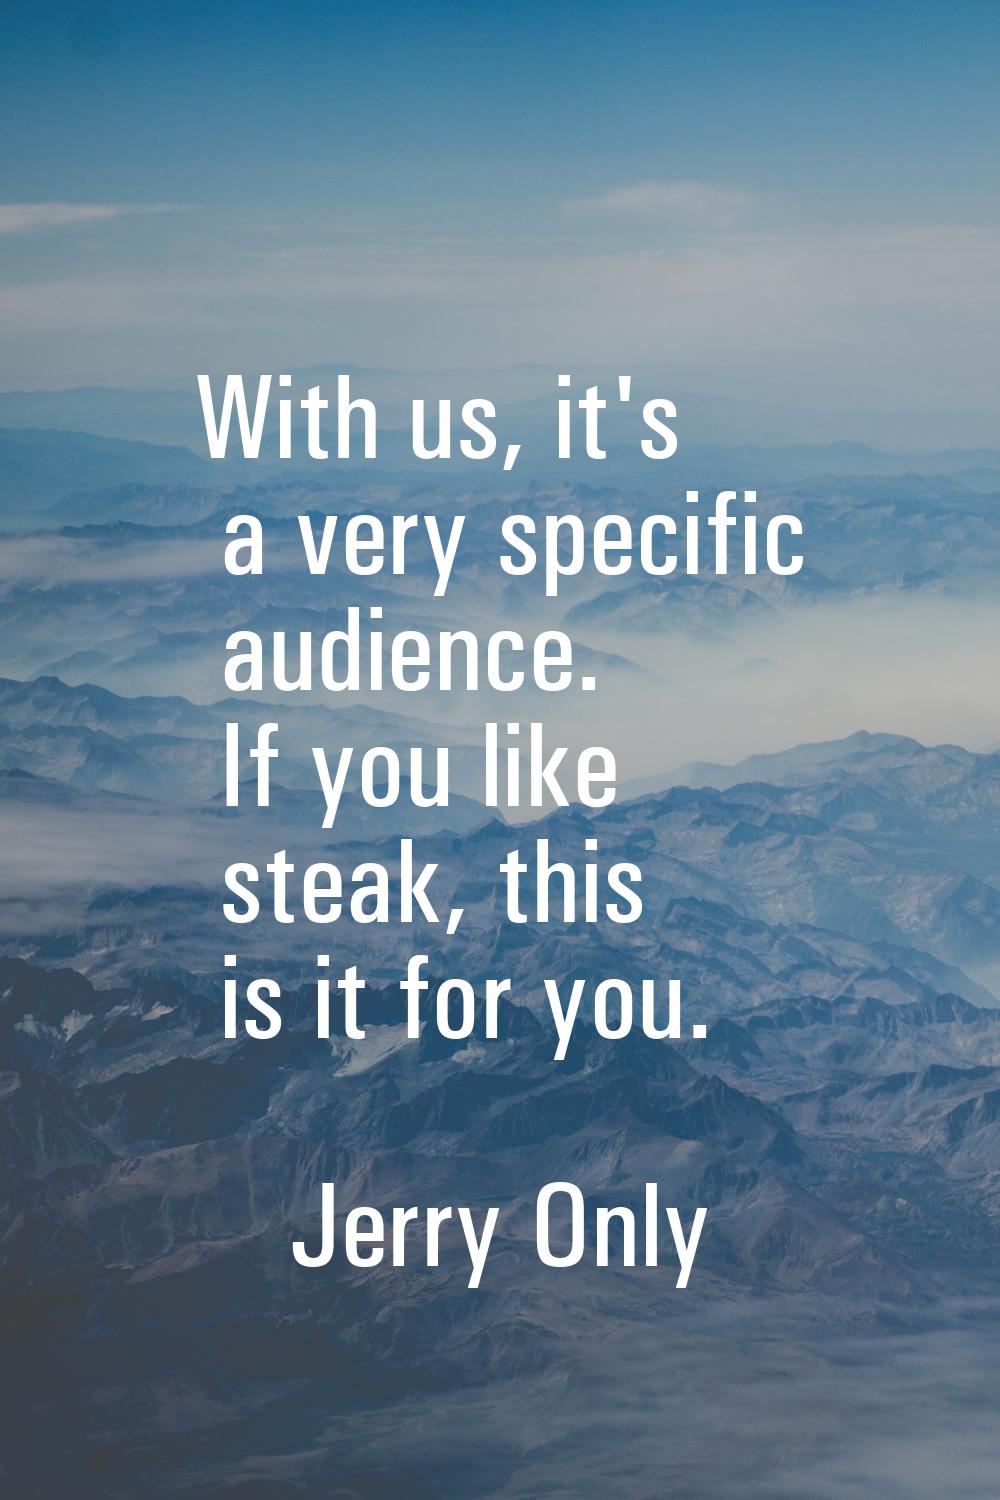 With us, it's a very specific audience. If you like steak, this is it for you.